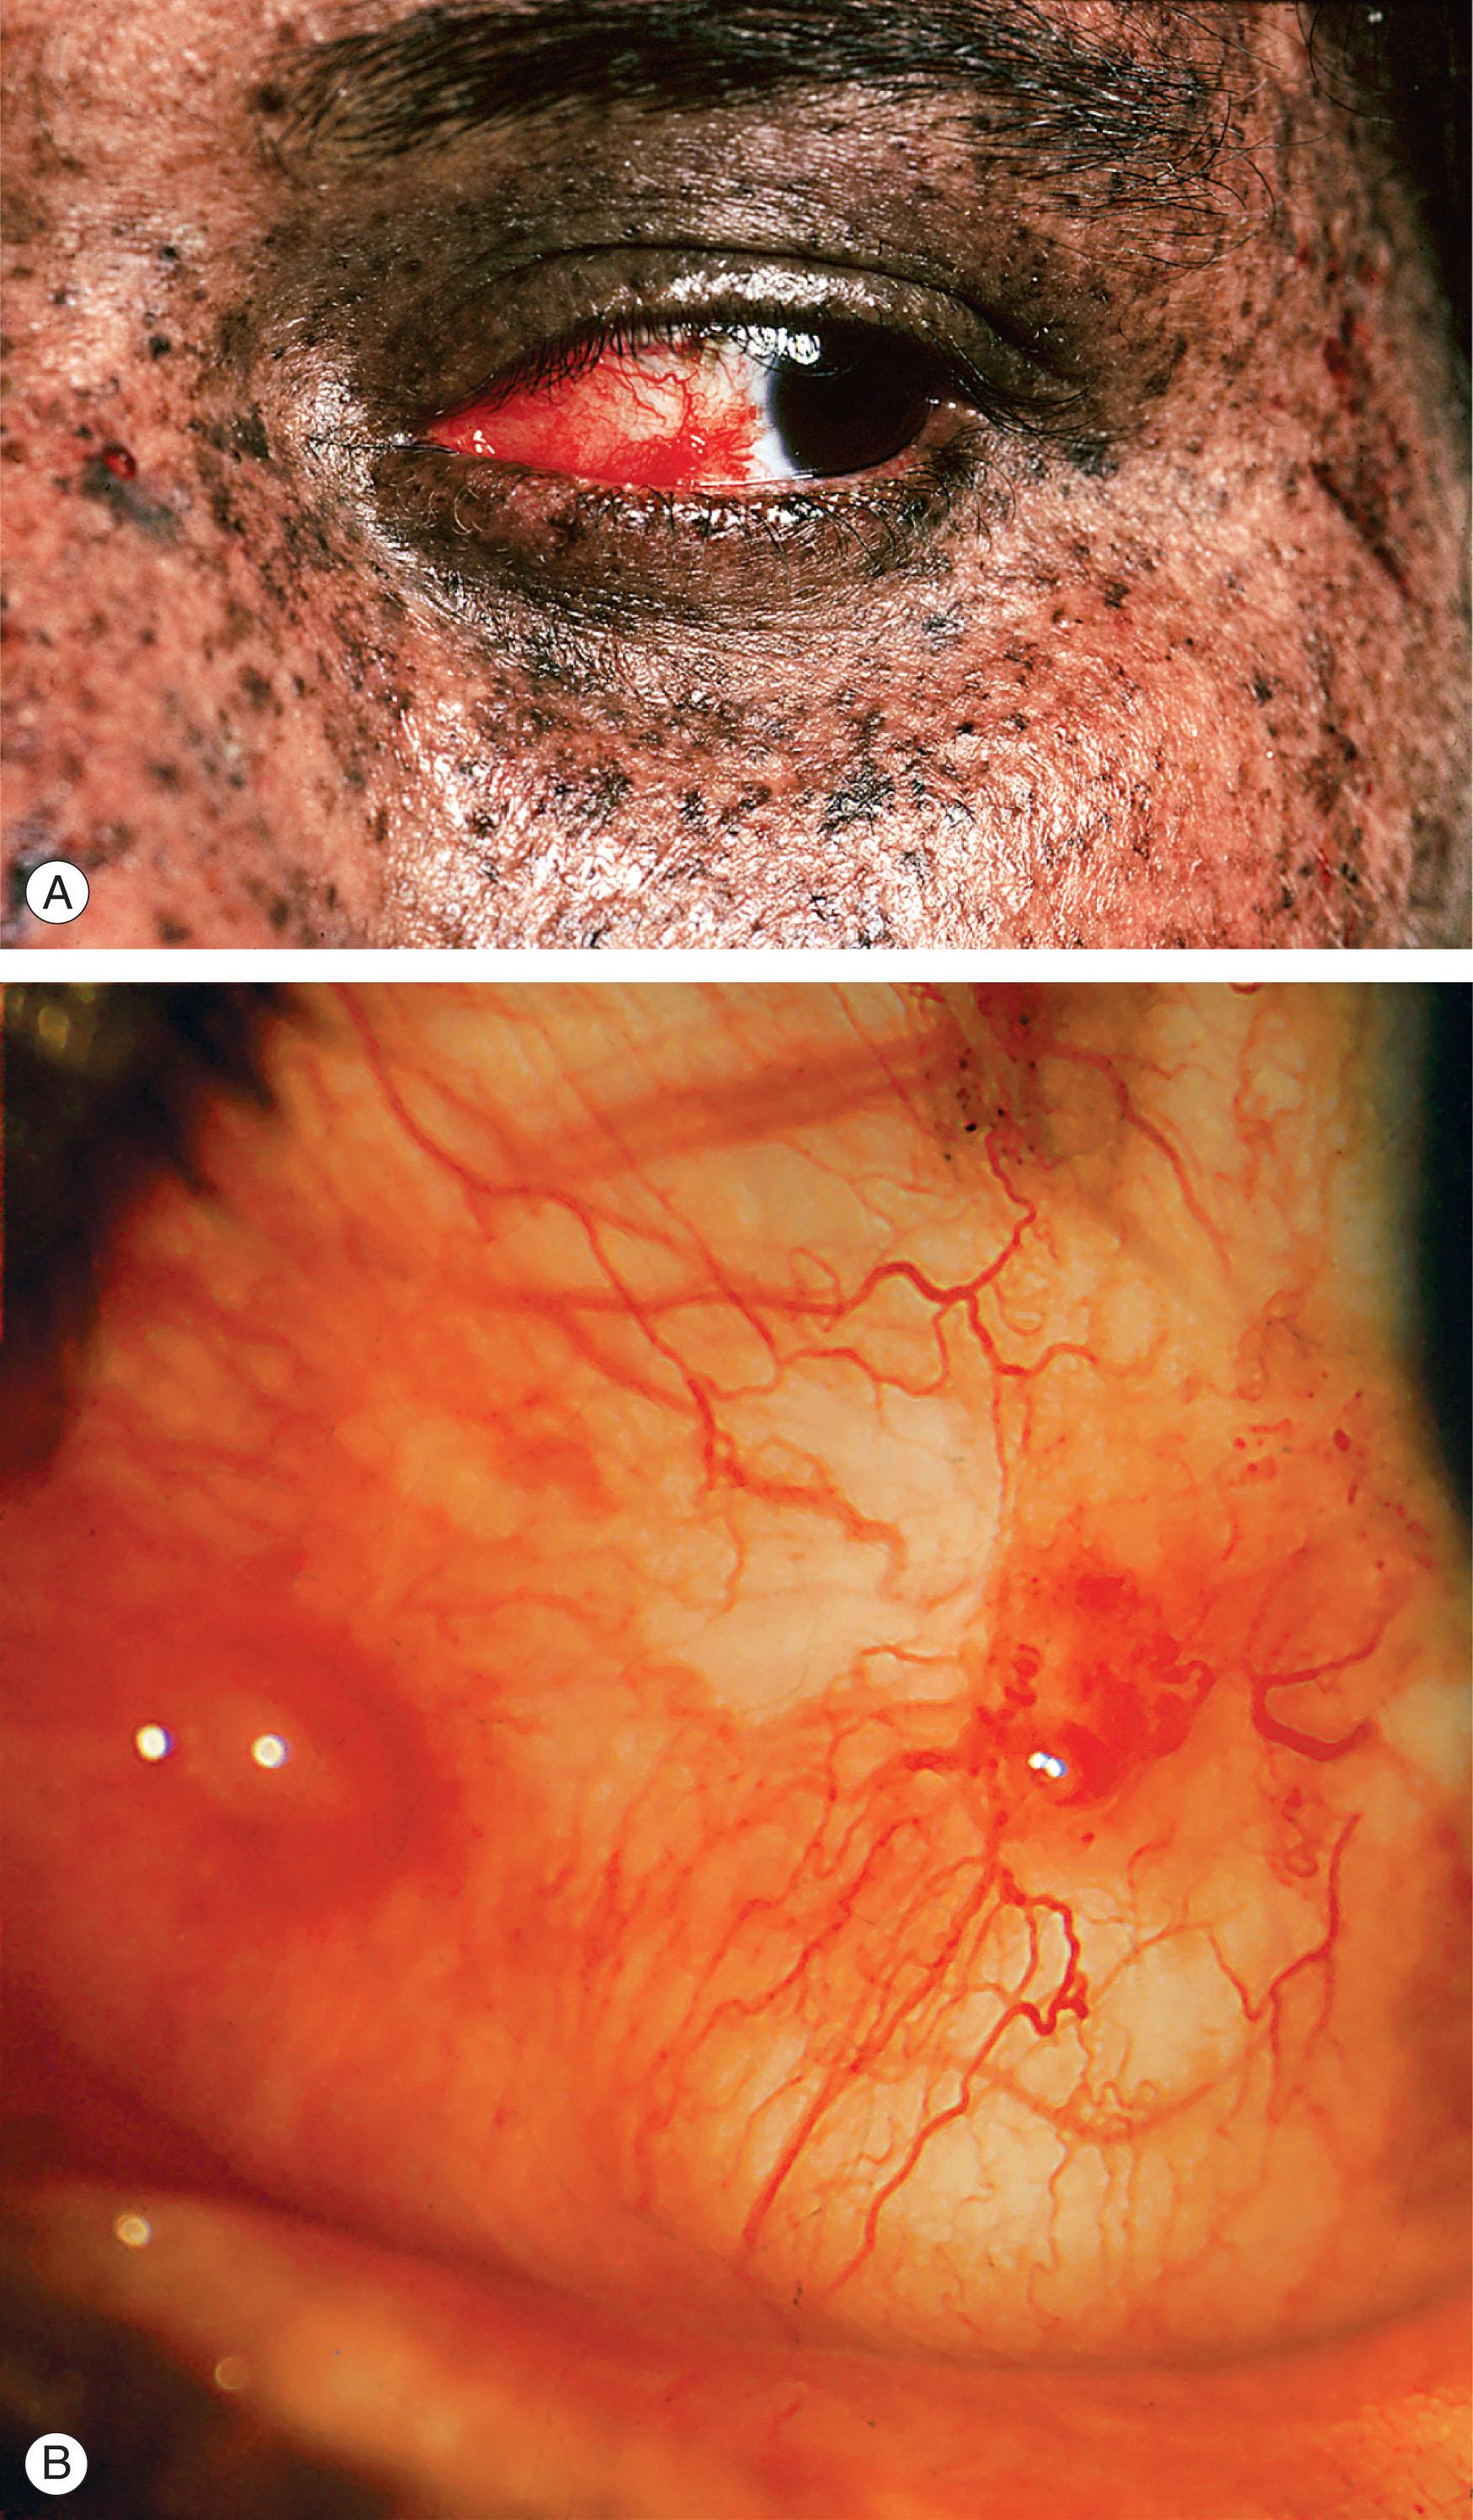 Fig. 29.3, Xeroderma pigmentosum. (A) The widespread skin pigmentation can be seen in this girl of Indian origin. (B) The conjunctiva was affected by multifocal recurrent squamous cell carcinomas.